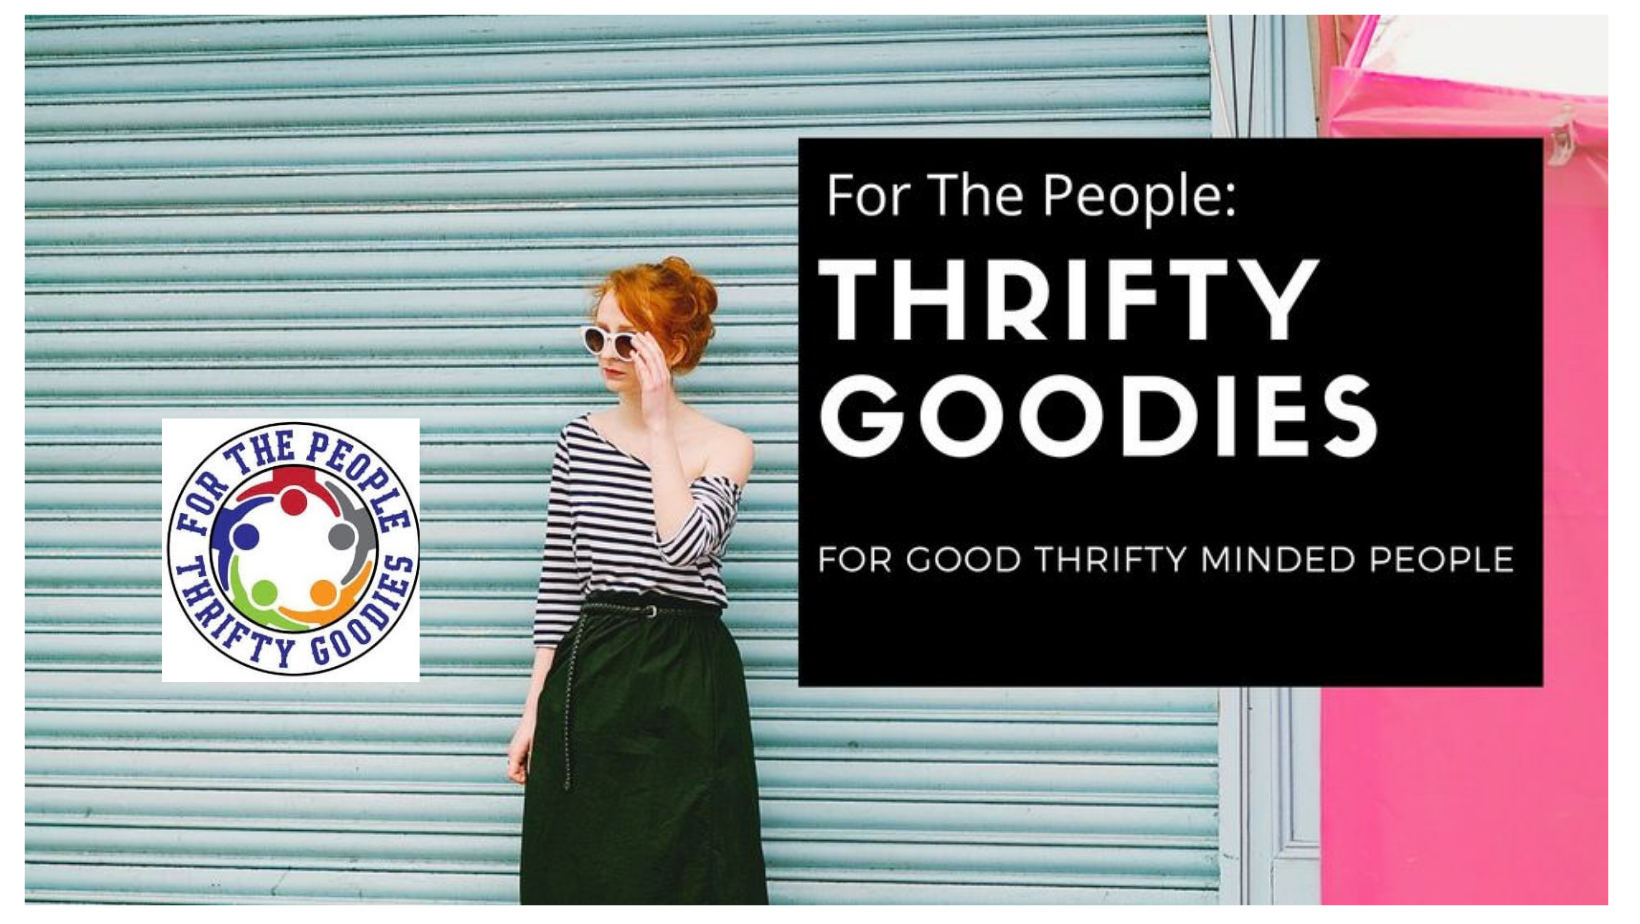 For The People: Thrifty Goodies Announces Its 3rd Annual Cold Weather Essentials Donation Drive 